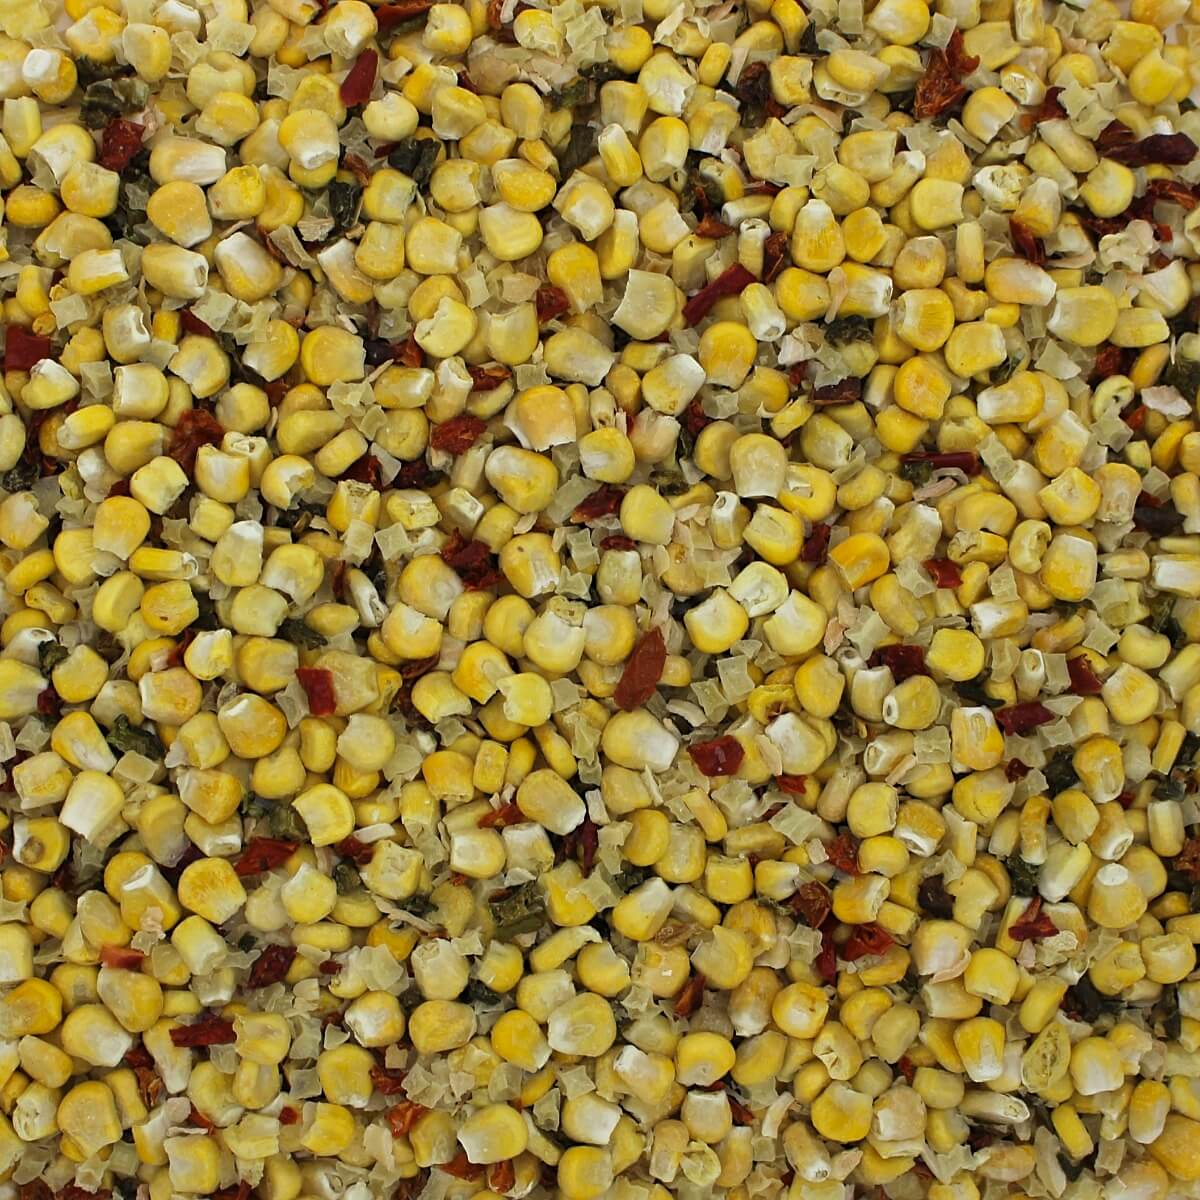 A close up image of a pile of corn featuring Harmony House Soup and Chili Mix Sampler.